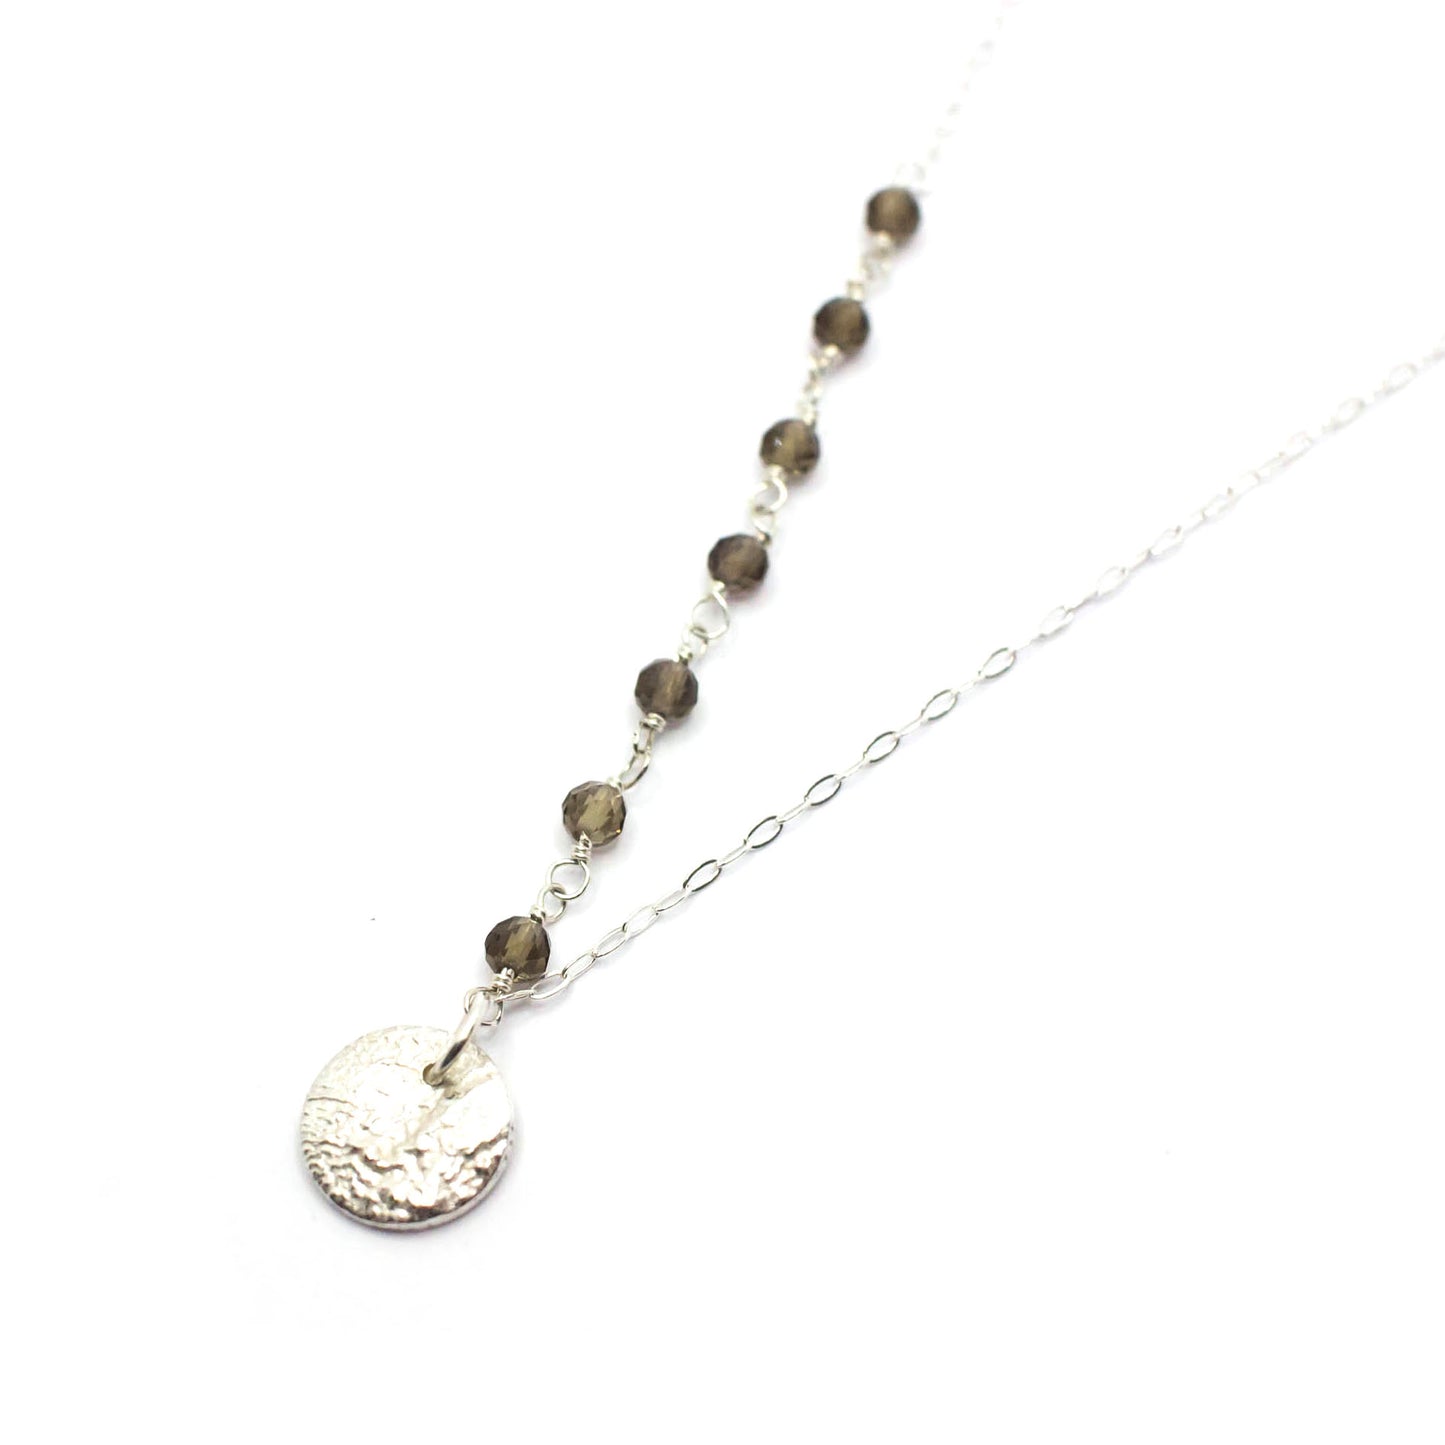 Lunar Charm Necklace in Sterling Silver and Smokey Quartz